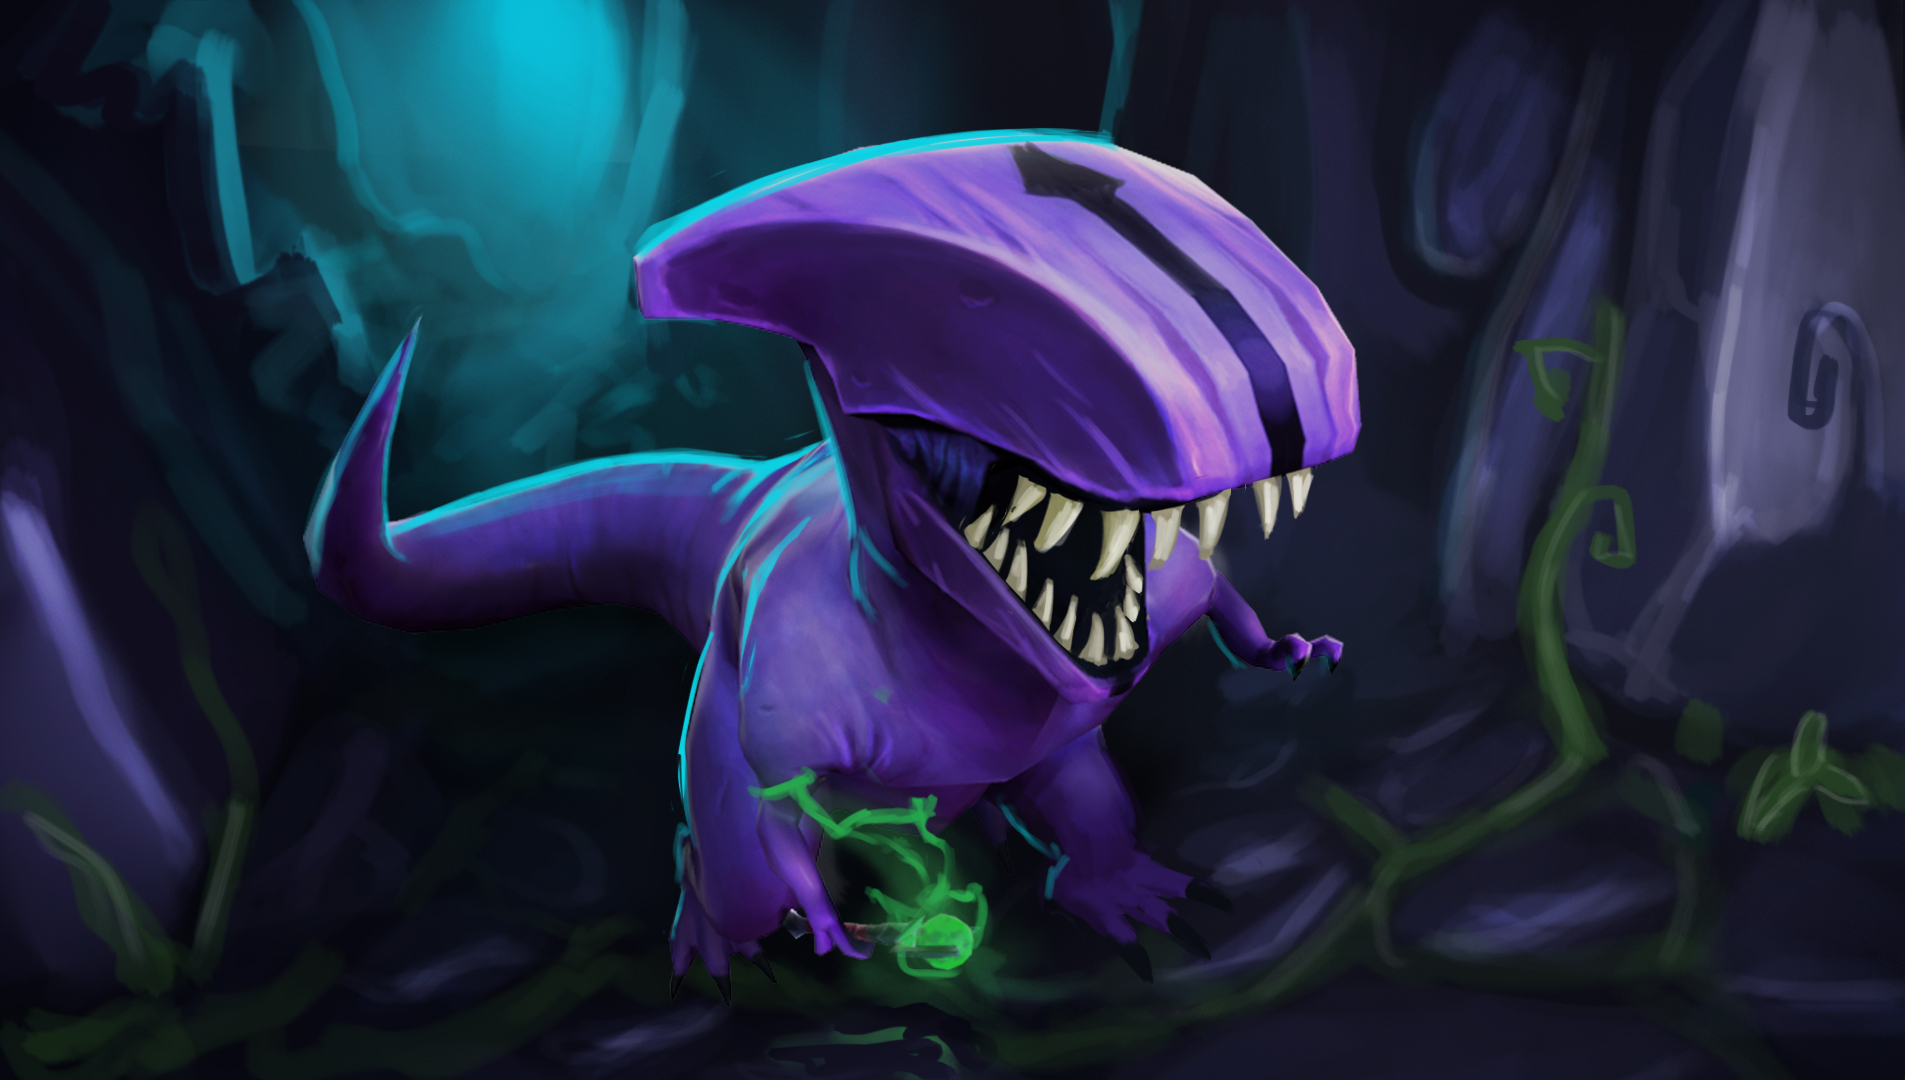 Son of the Faceless Void Wallpaper Dota 2 HD Backgrounds